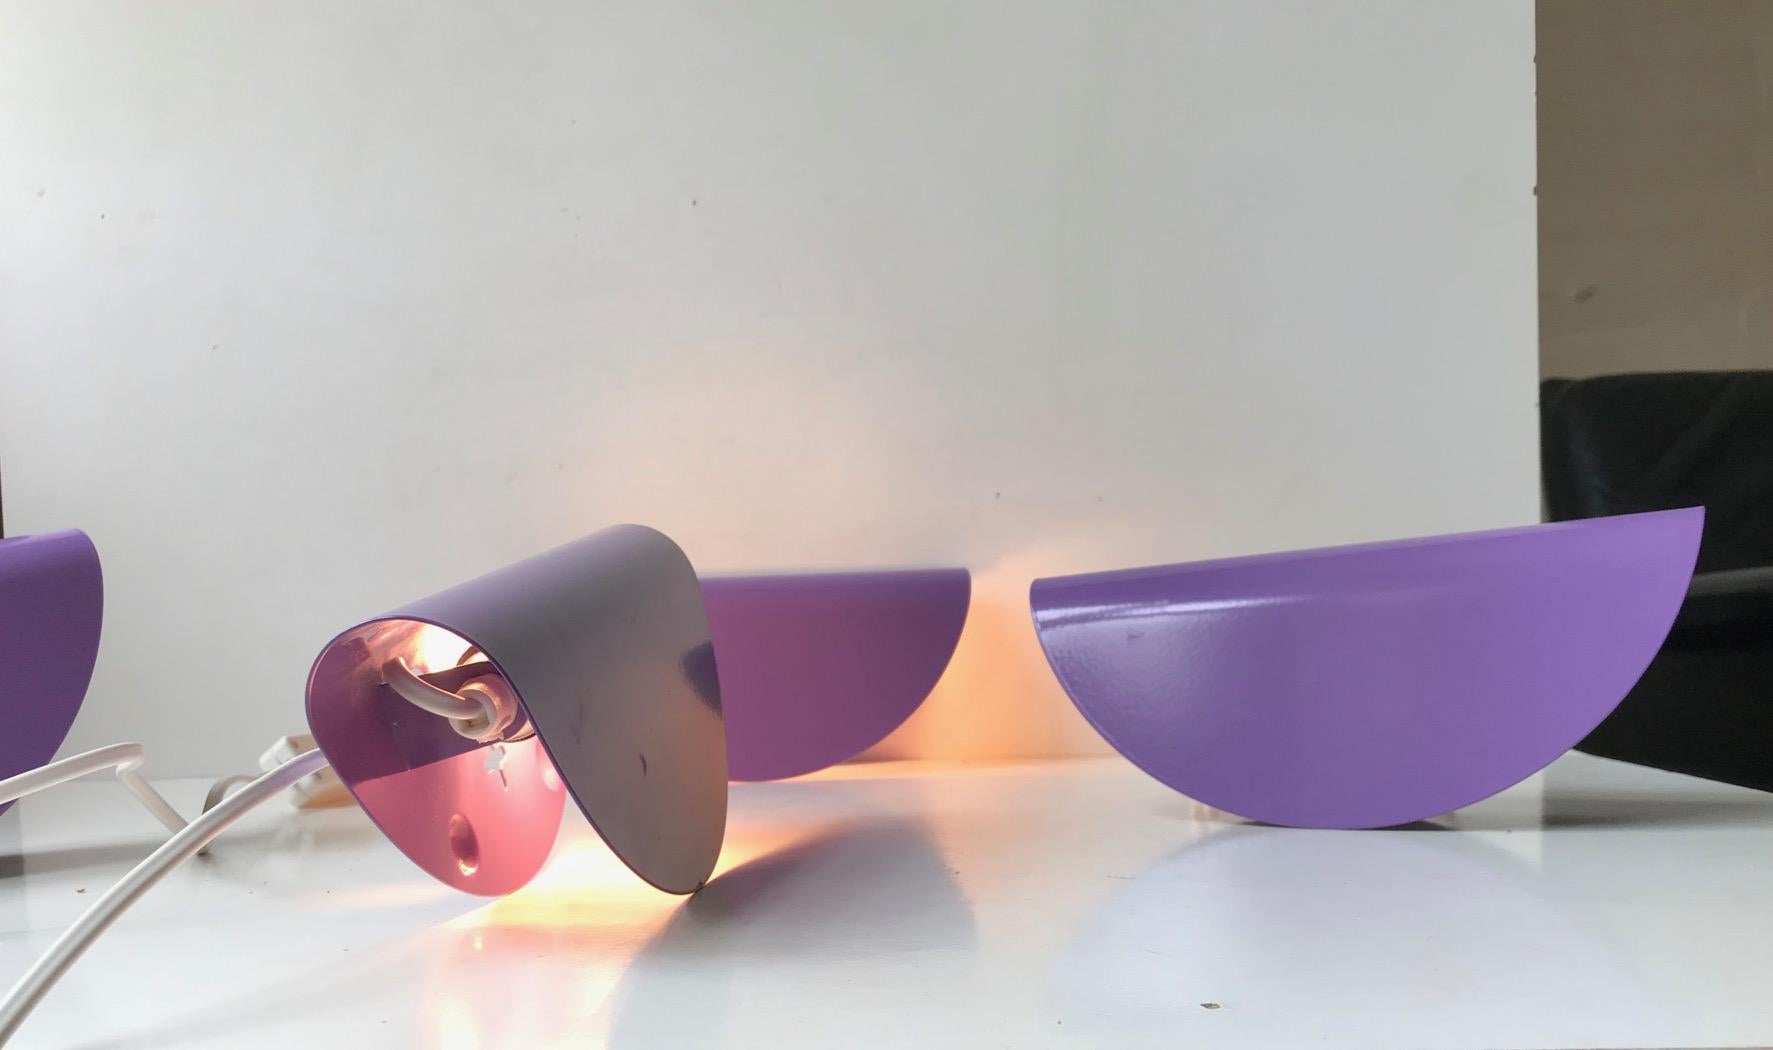 Matching set of 4 purple wall lights. Stylistically they are in the realm of Nordic/Scandinavian Minimalism. Designed and manufactured in Denmark during the 1980s or early 1990s. They are made from a circle of powder coated steel that are bend so